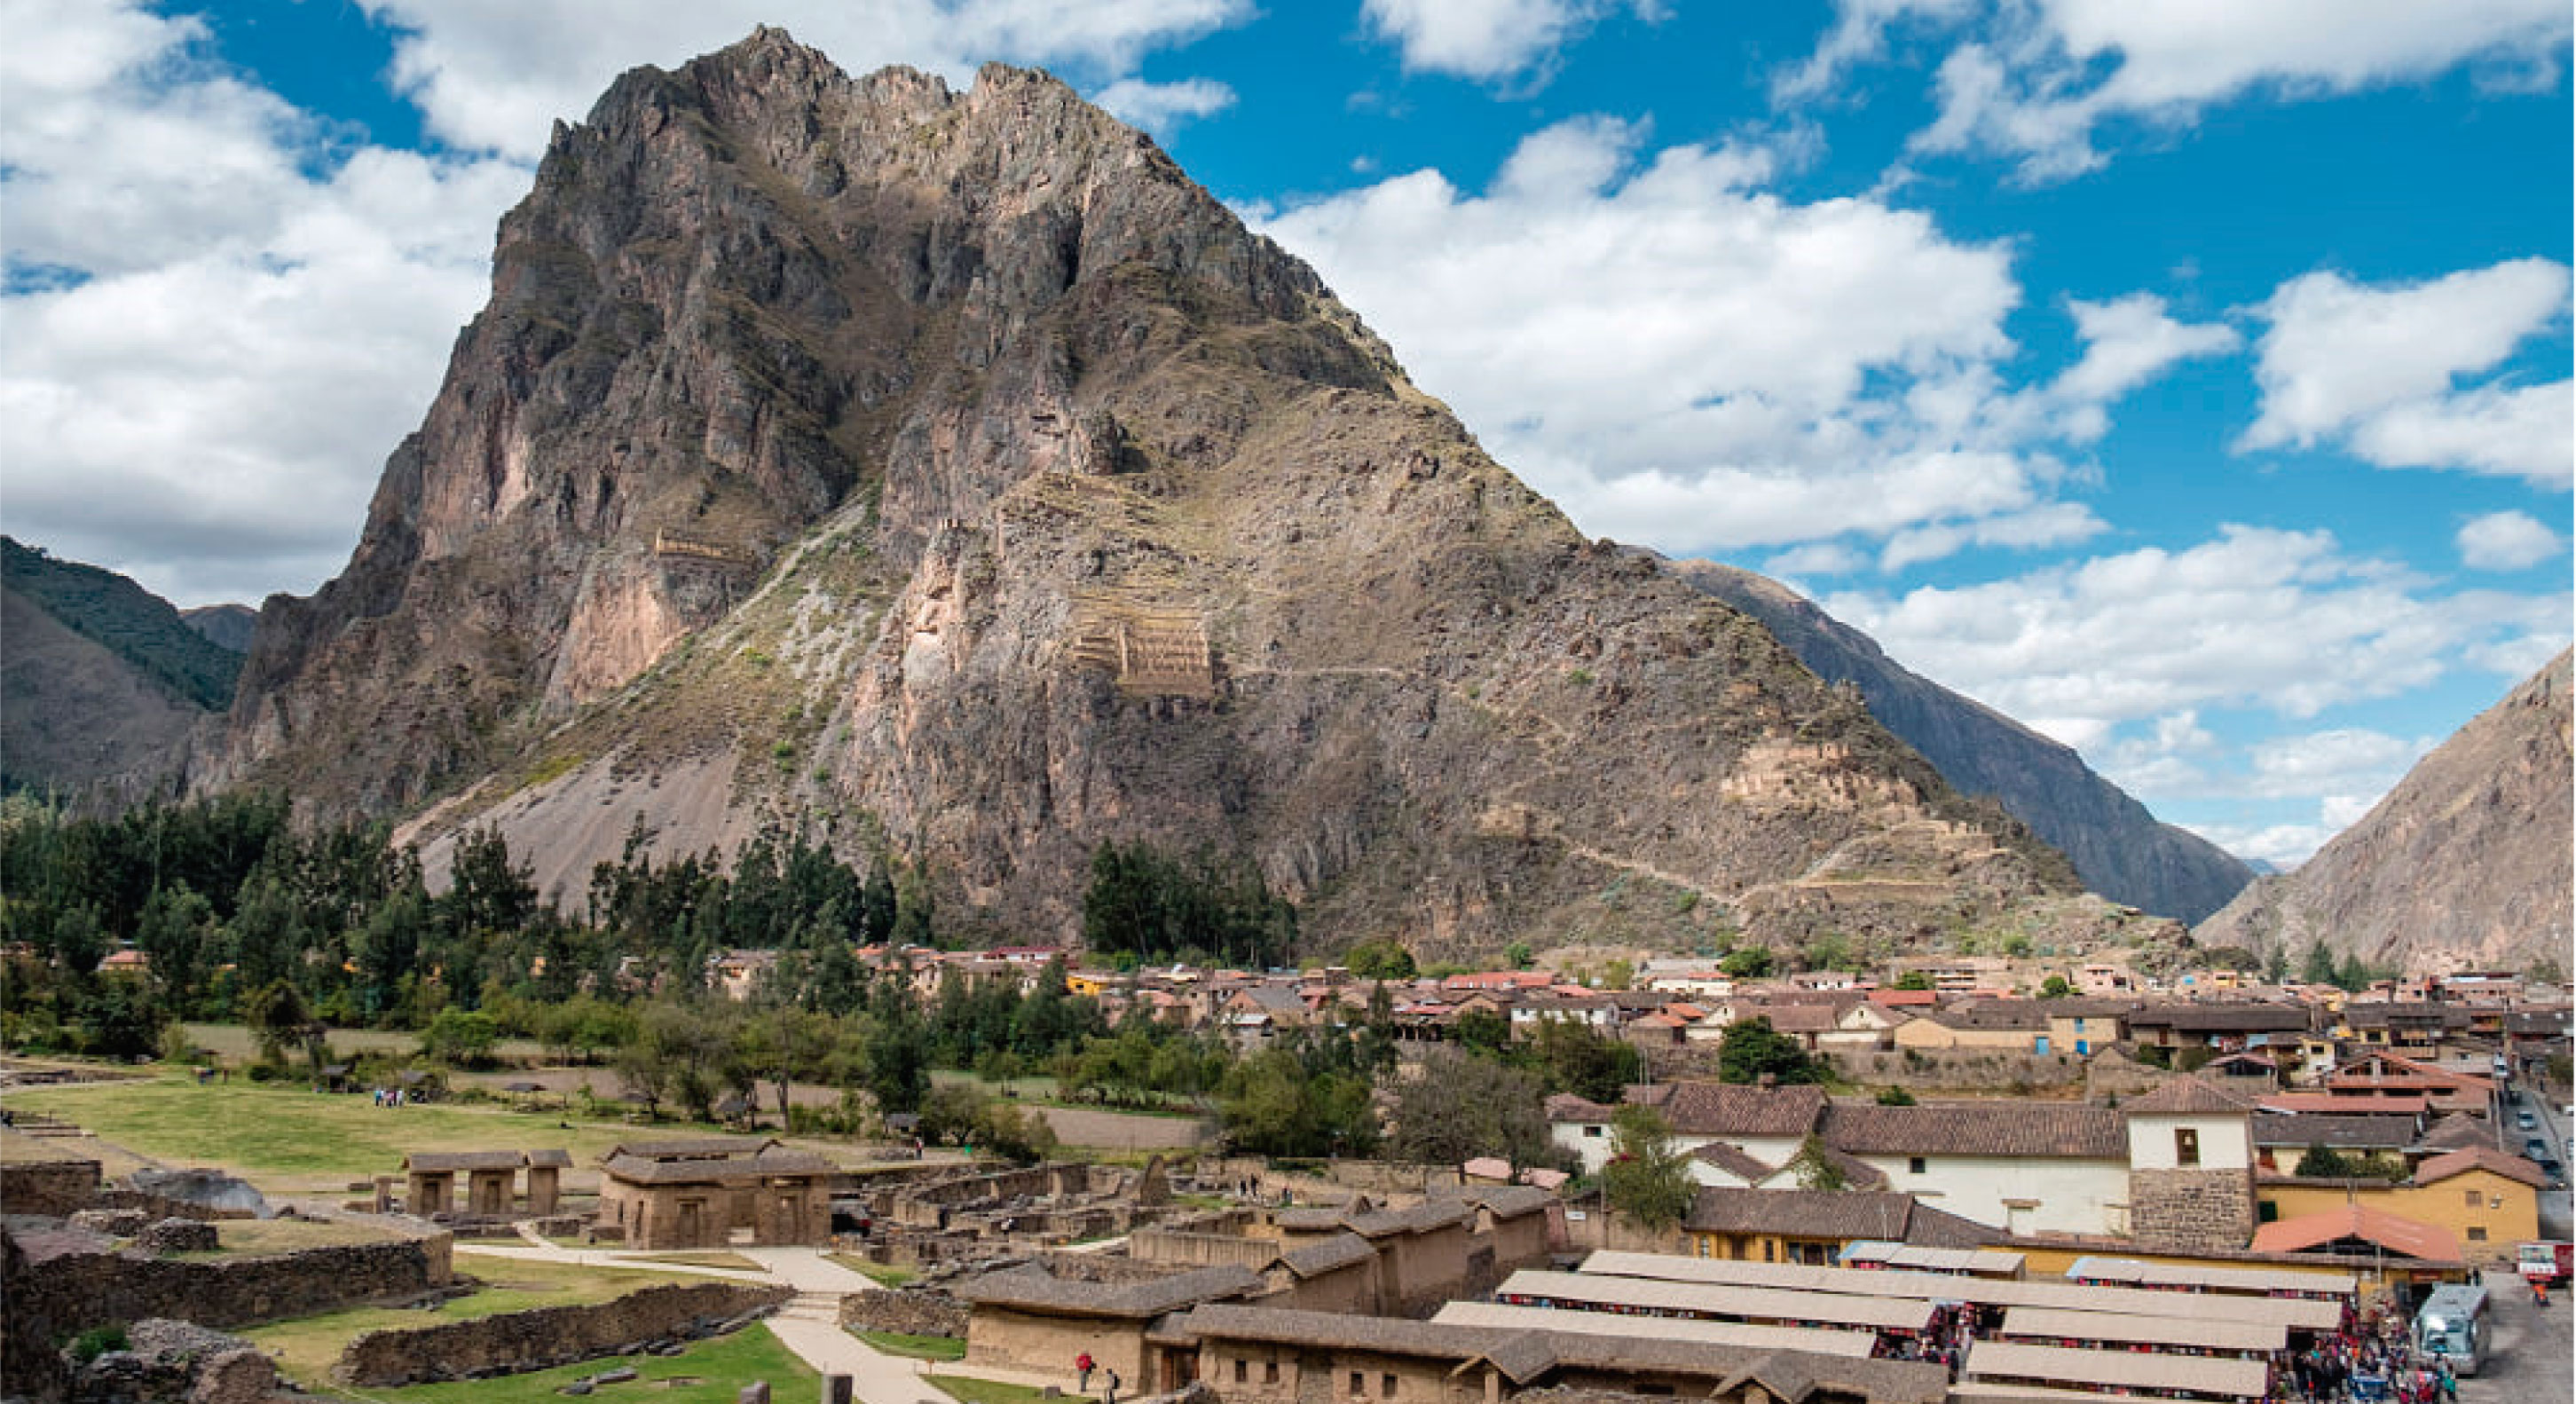 What else to see in Ollantaytambo?